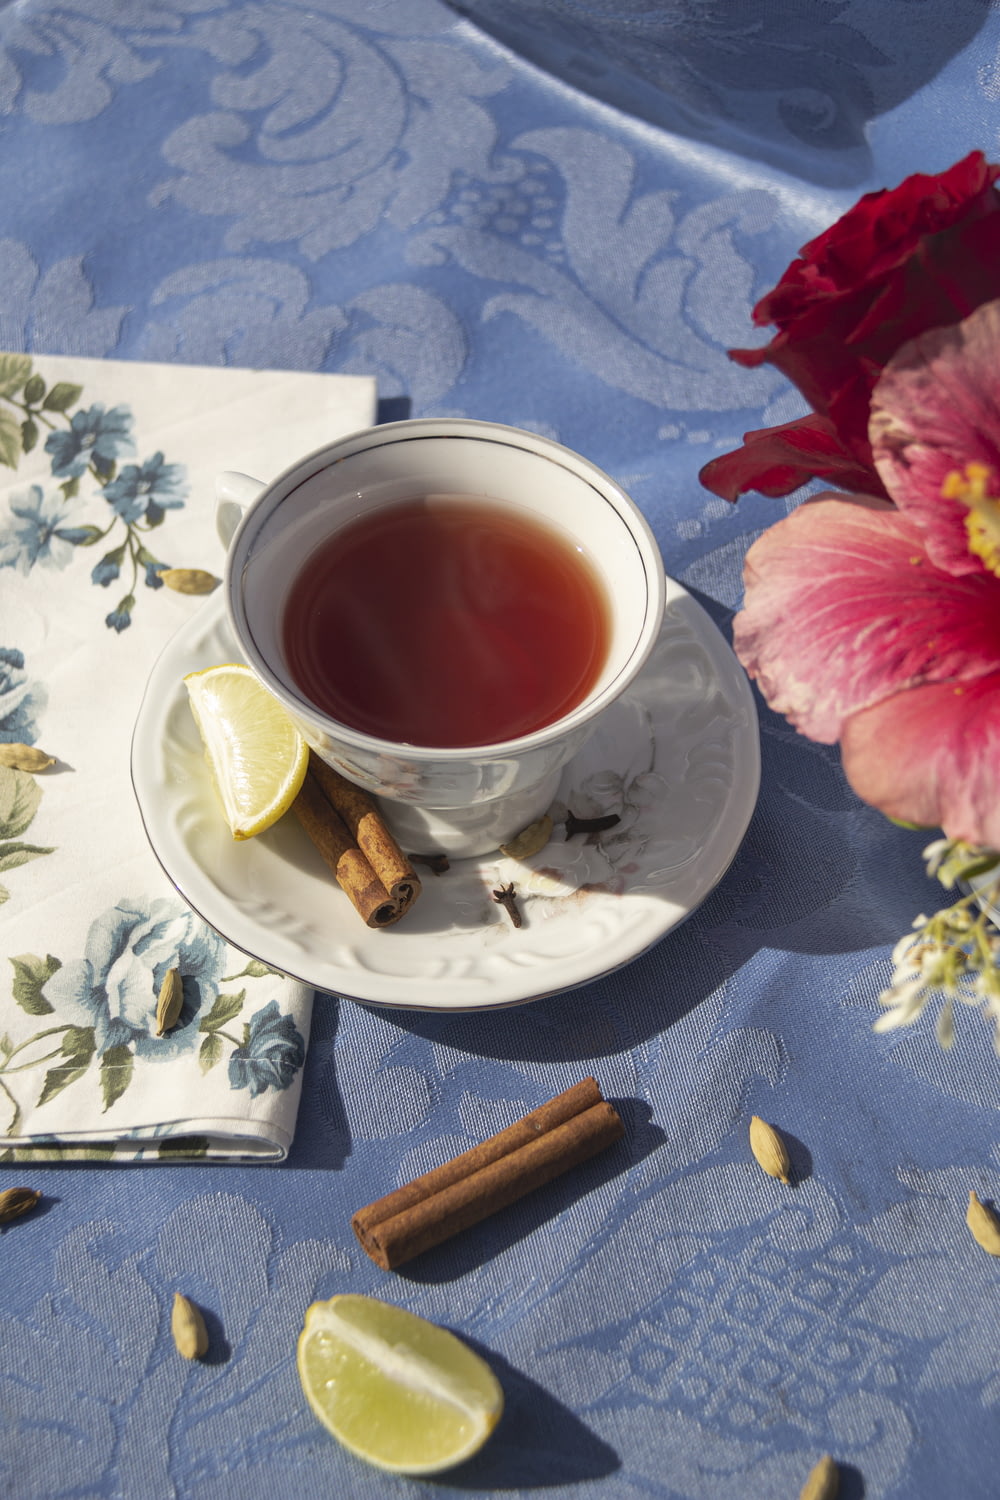 a cup of tea next to a napkin and a flower